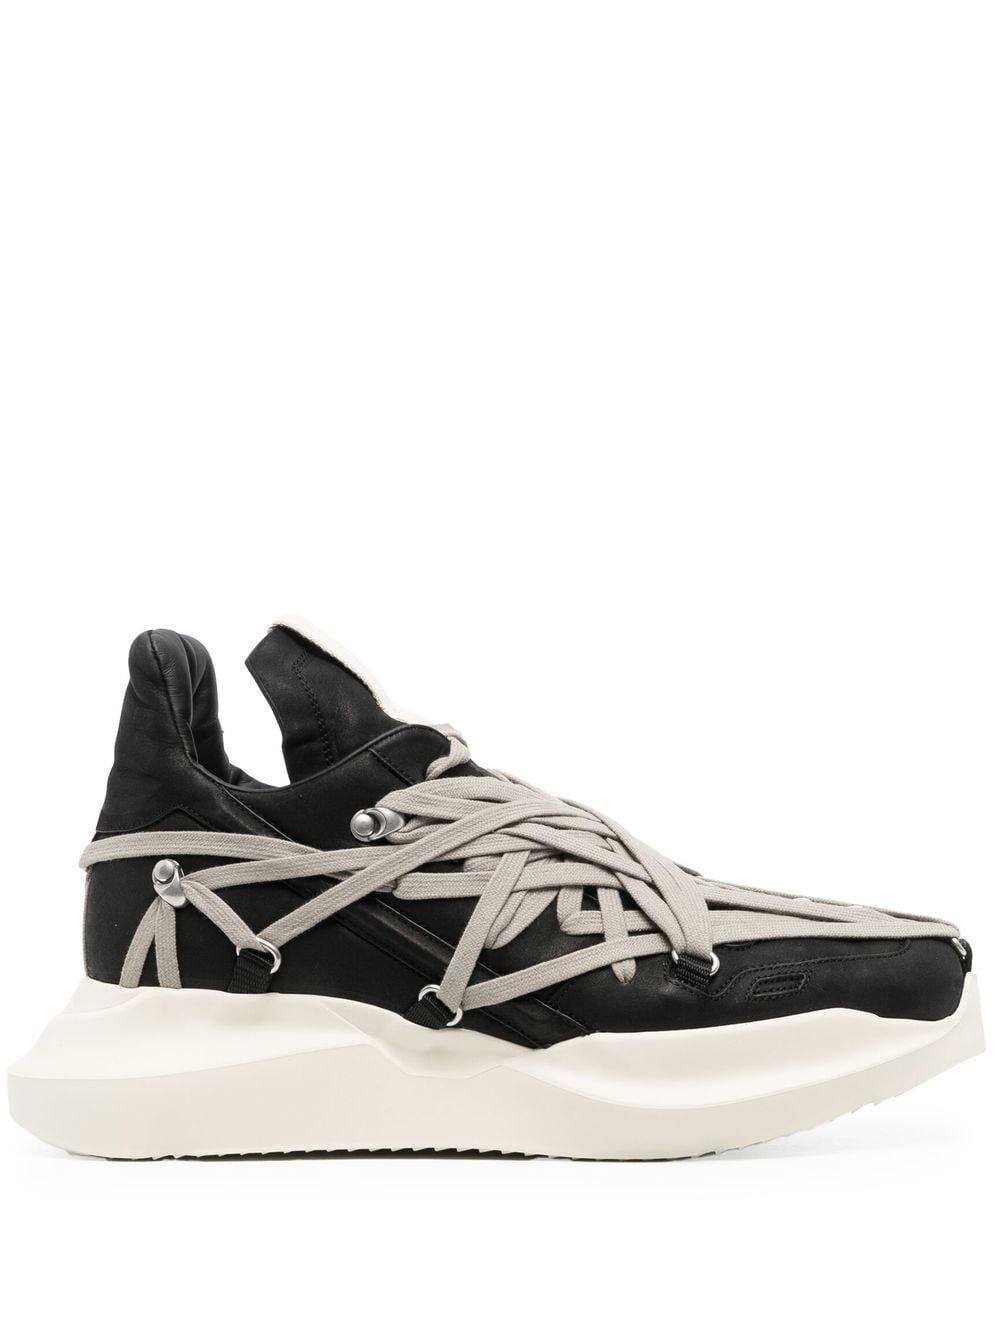 Rick Owens Megalace Runner Sneakers in Black for Men | Lyst Canada